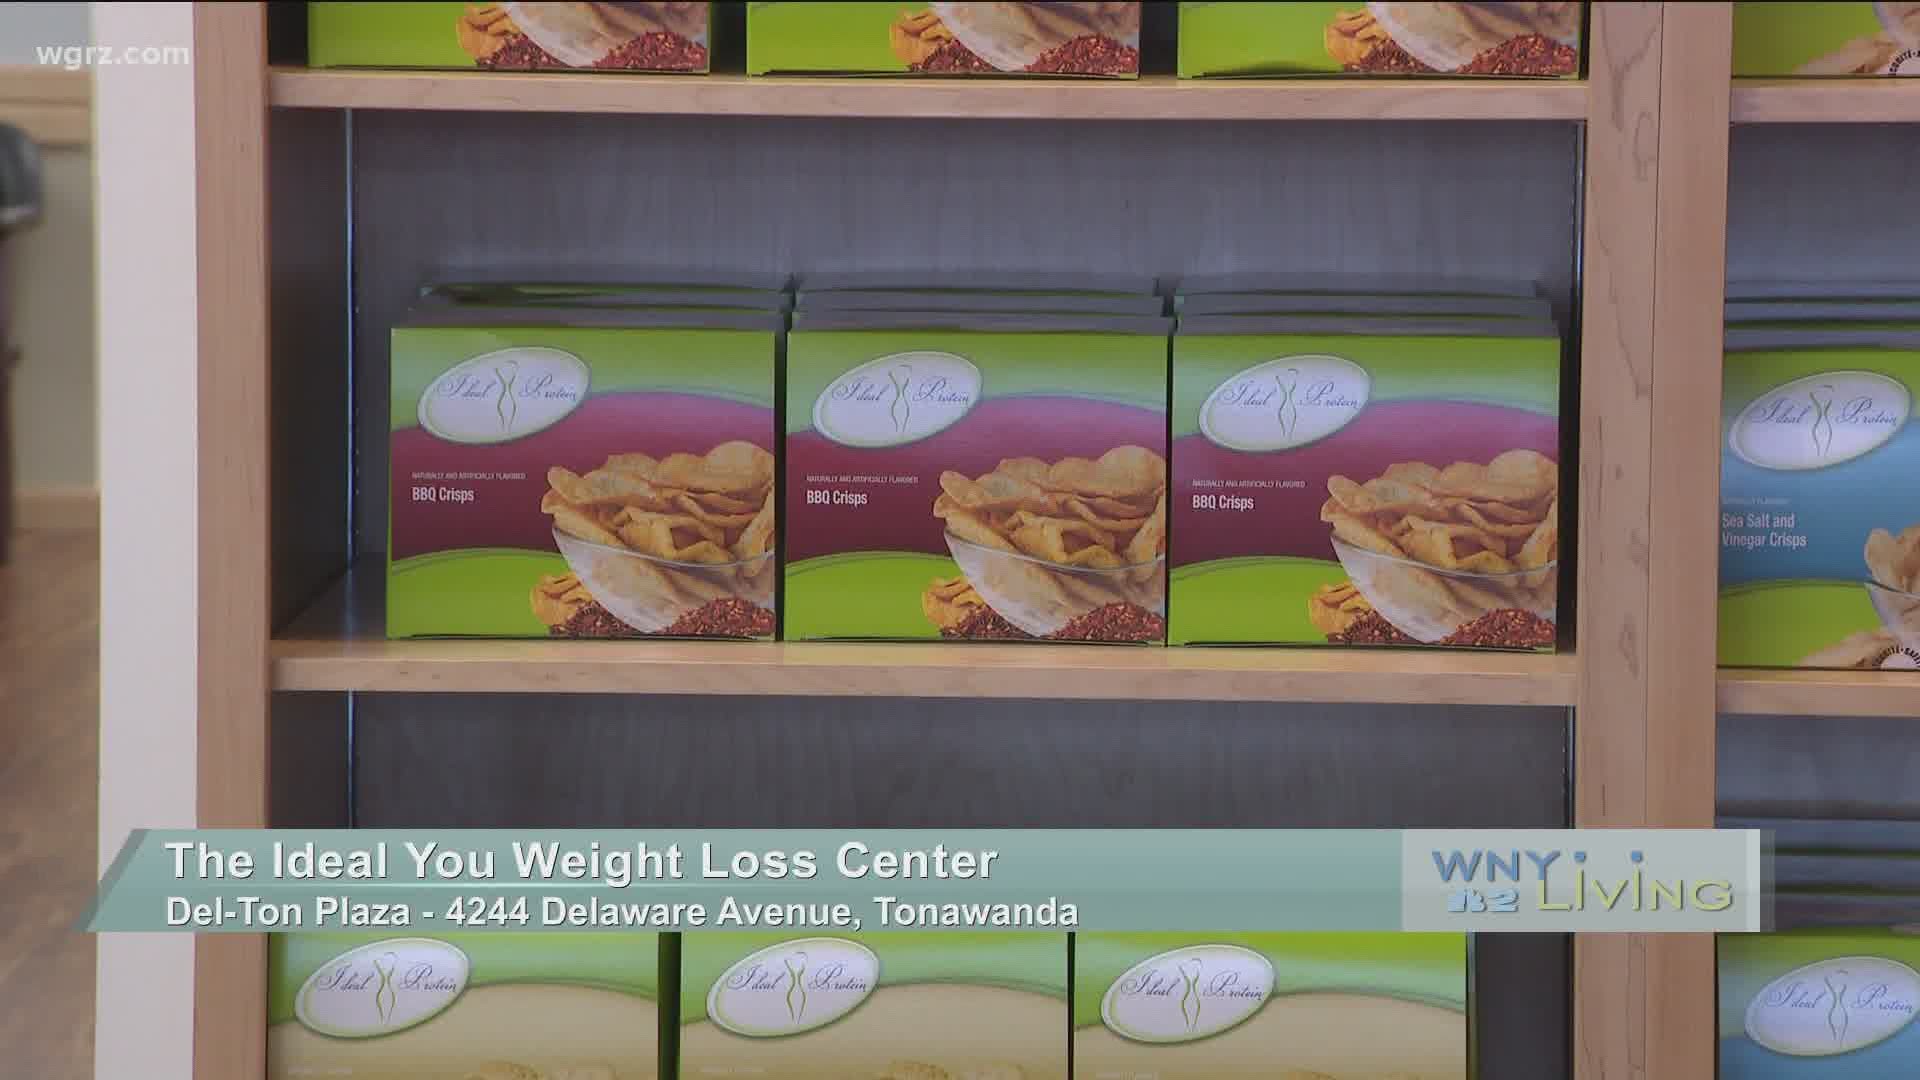 WNY Living - July 18 - The Ideal You Weight Loss Center (THIS VIDEO IS SPONSORED BY THE IDEAL YOU WEIGHT LOSS CENTER)